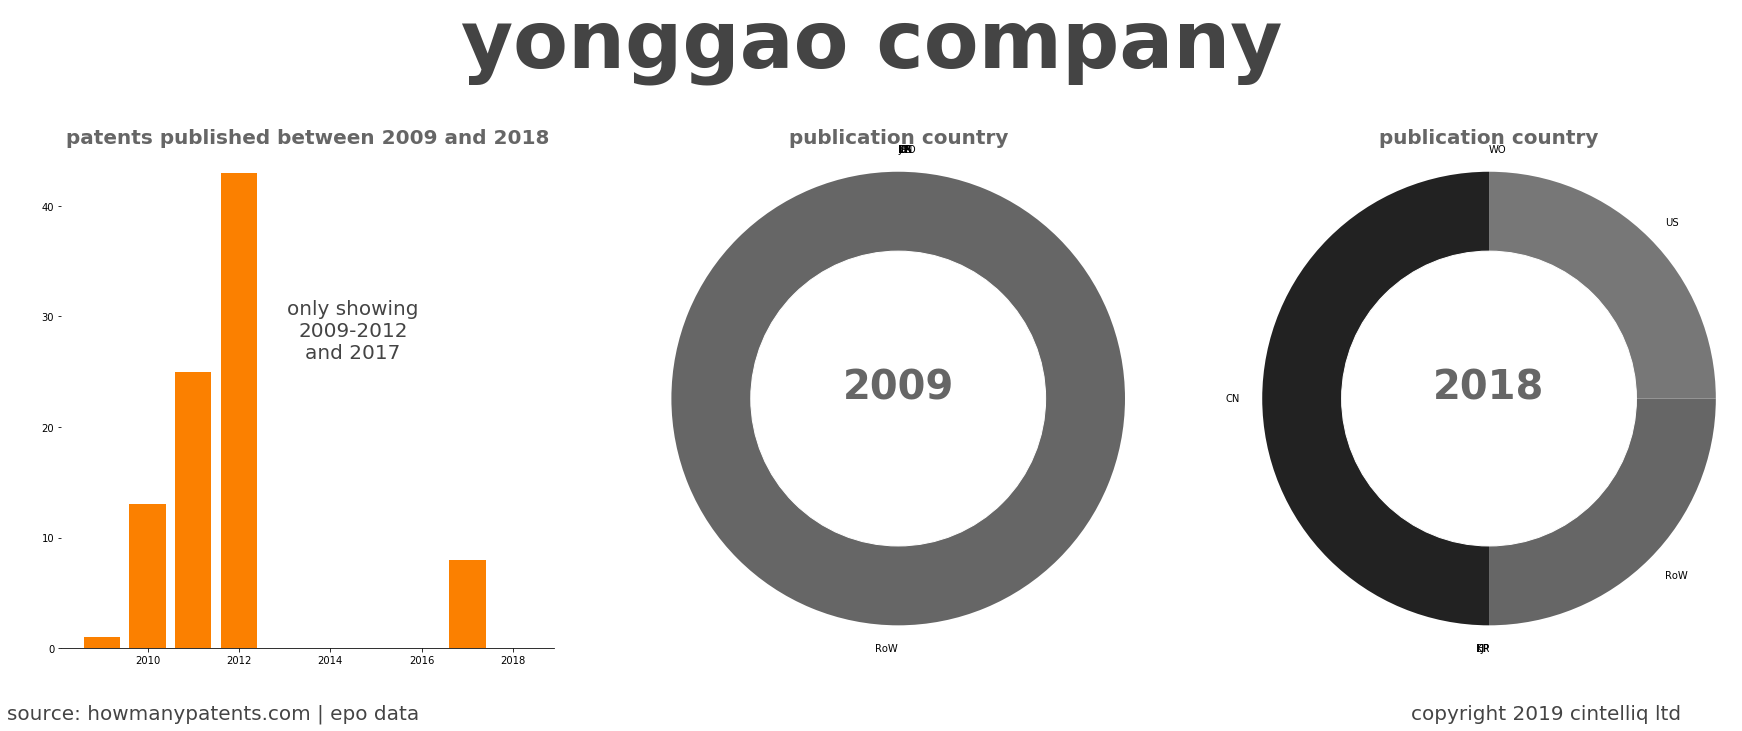 summary of patents for Yonggao Company